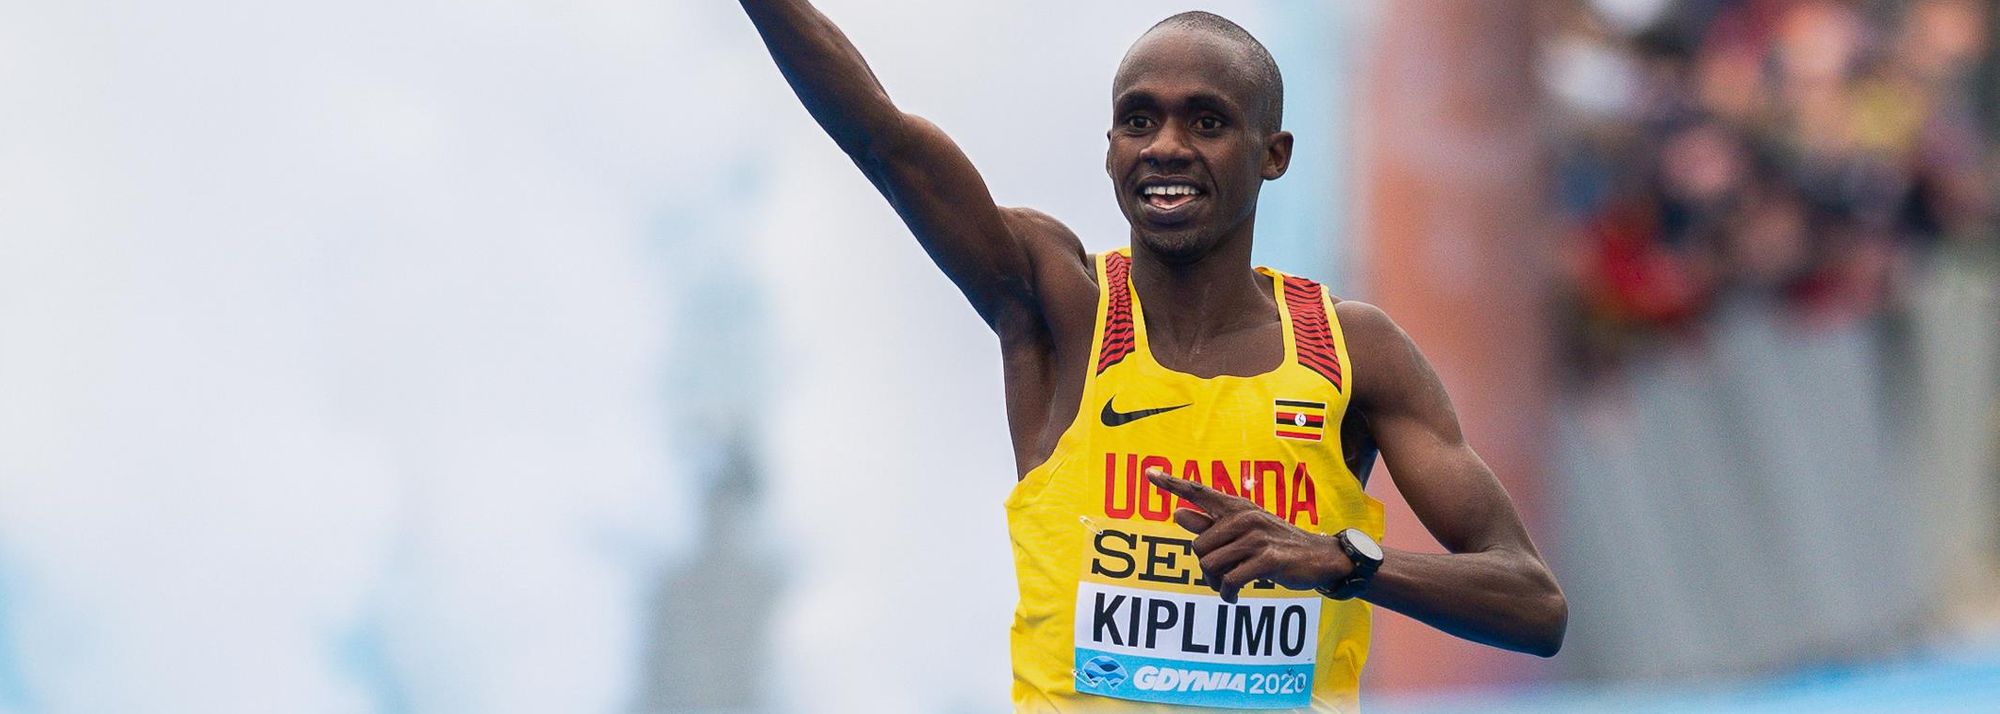 Jacob Kiplimo's road to the top of the world started in Kween, a rural district in the east of Uganda, close to the Kenyan border.